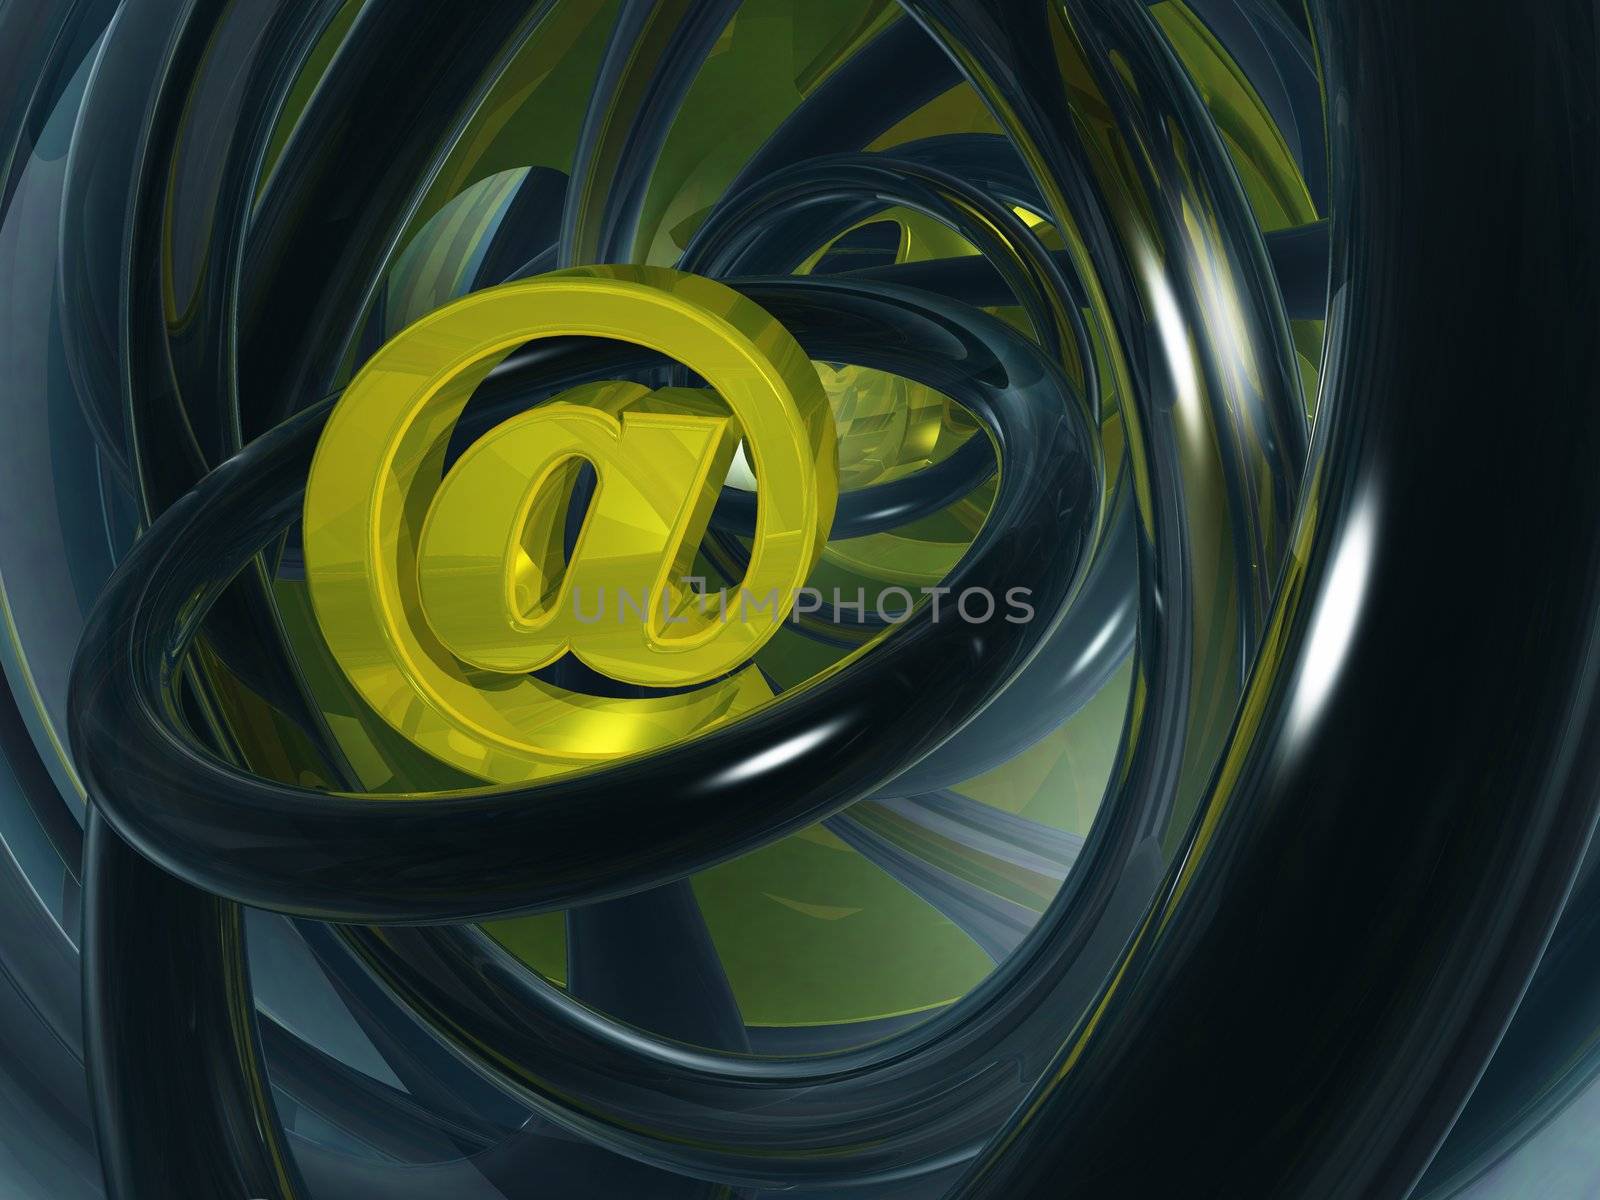 email alias in abstract space - 3d illustration